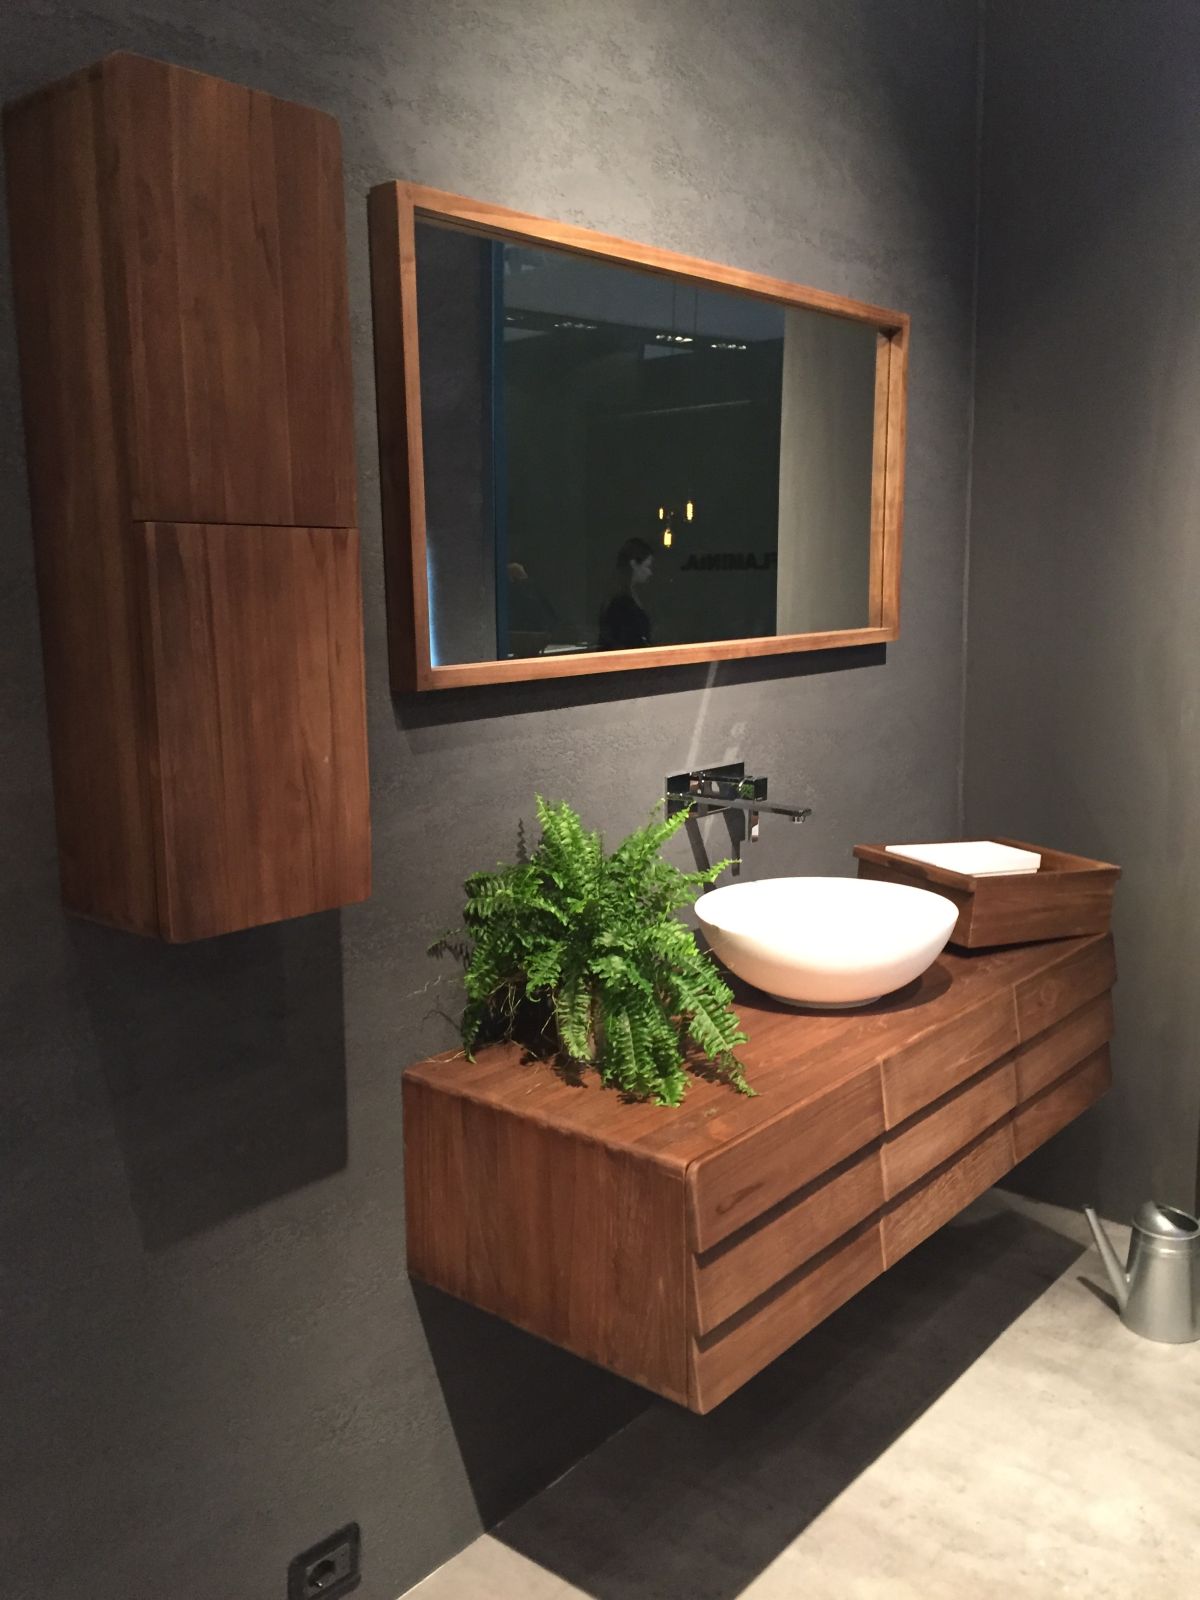 Floating wood vanity with a mid century flair